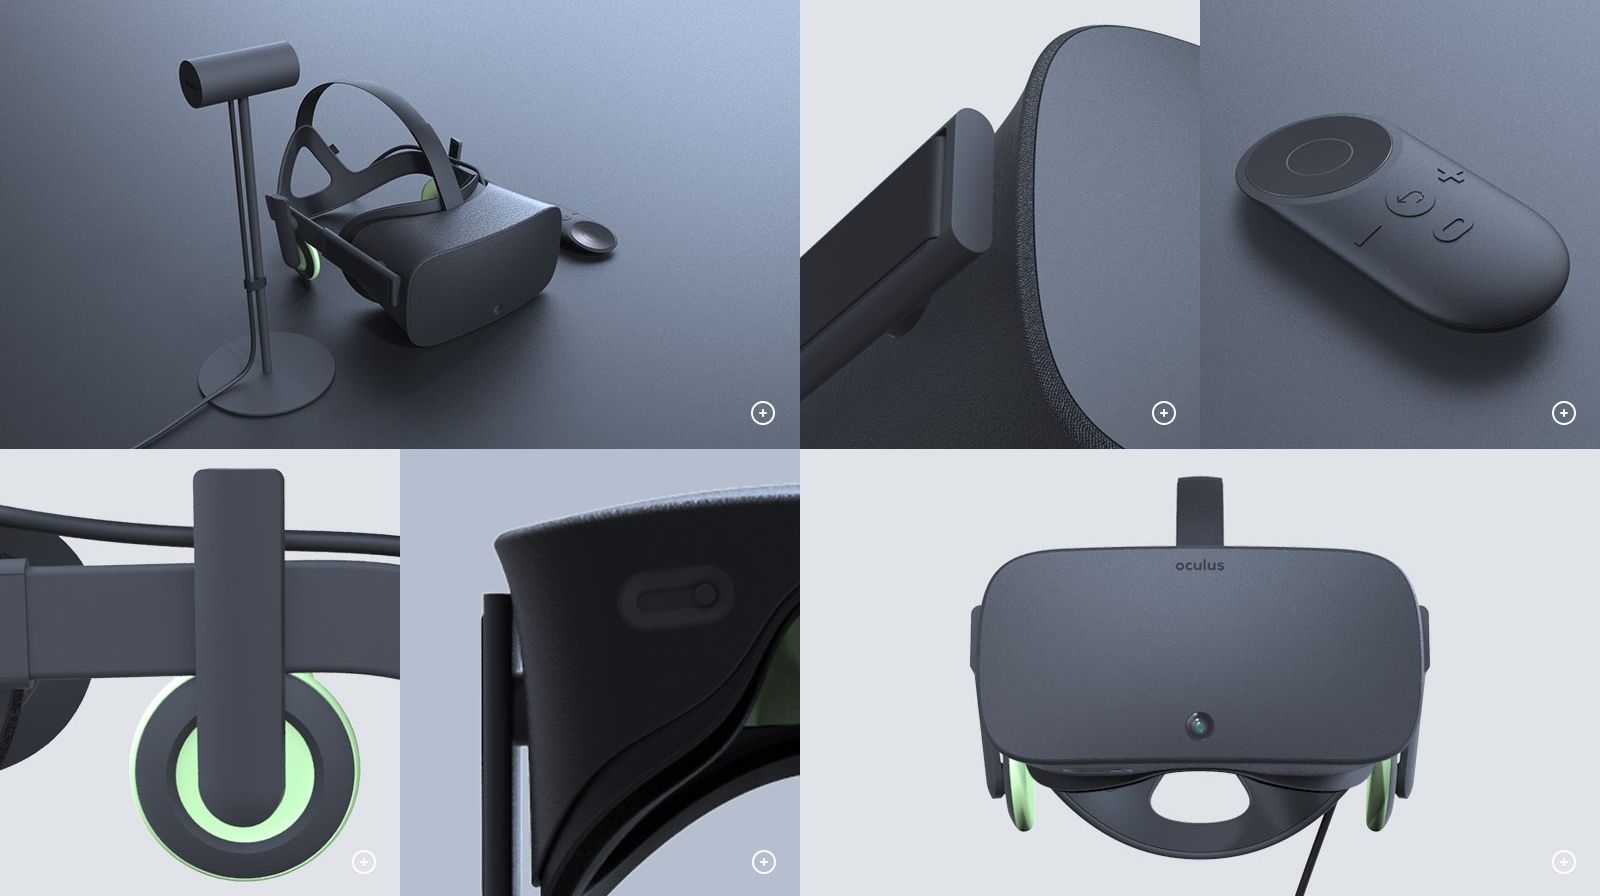 Giant Leak Shows Us How The Final Oculus Rift Looked In 2014